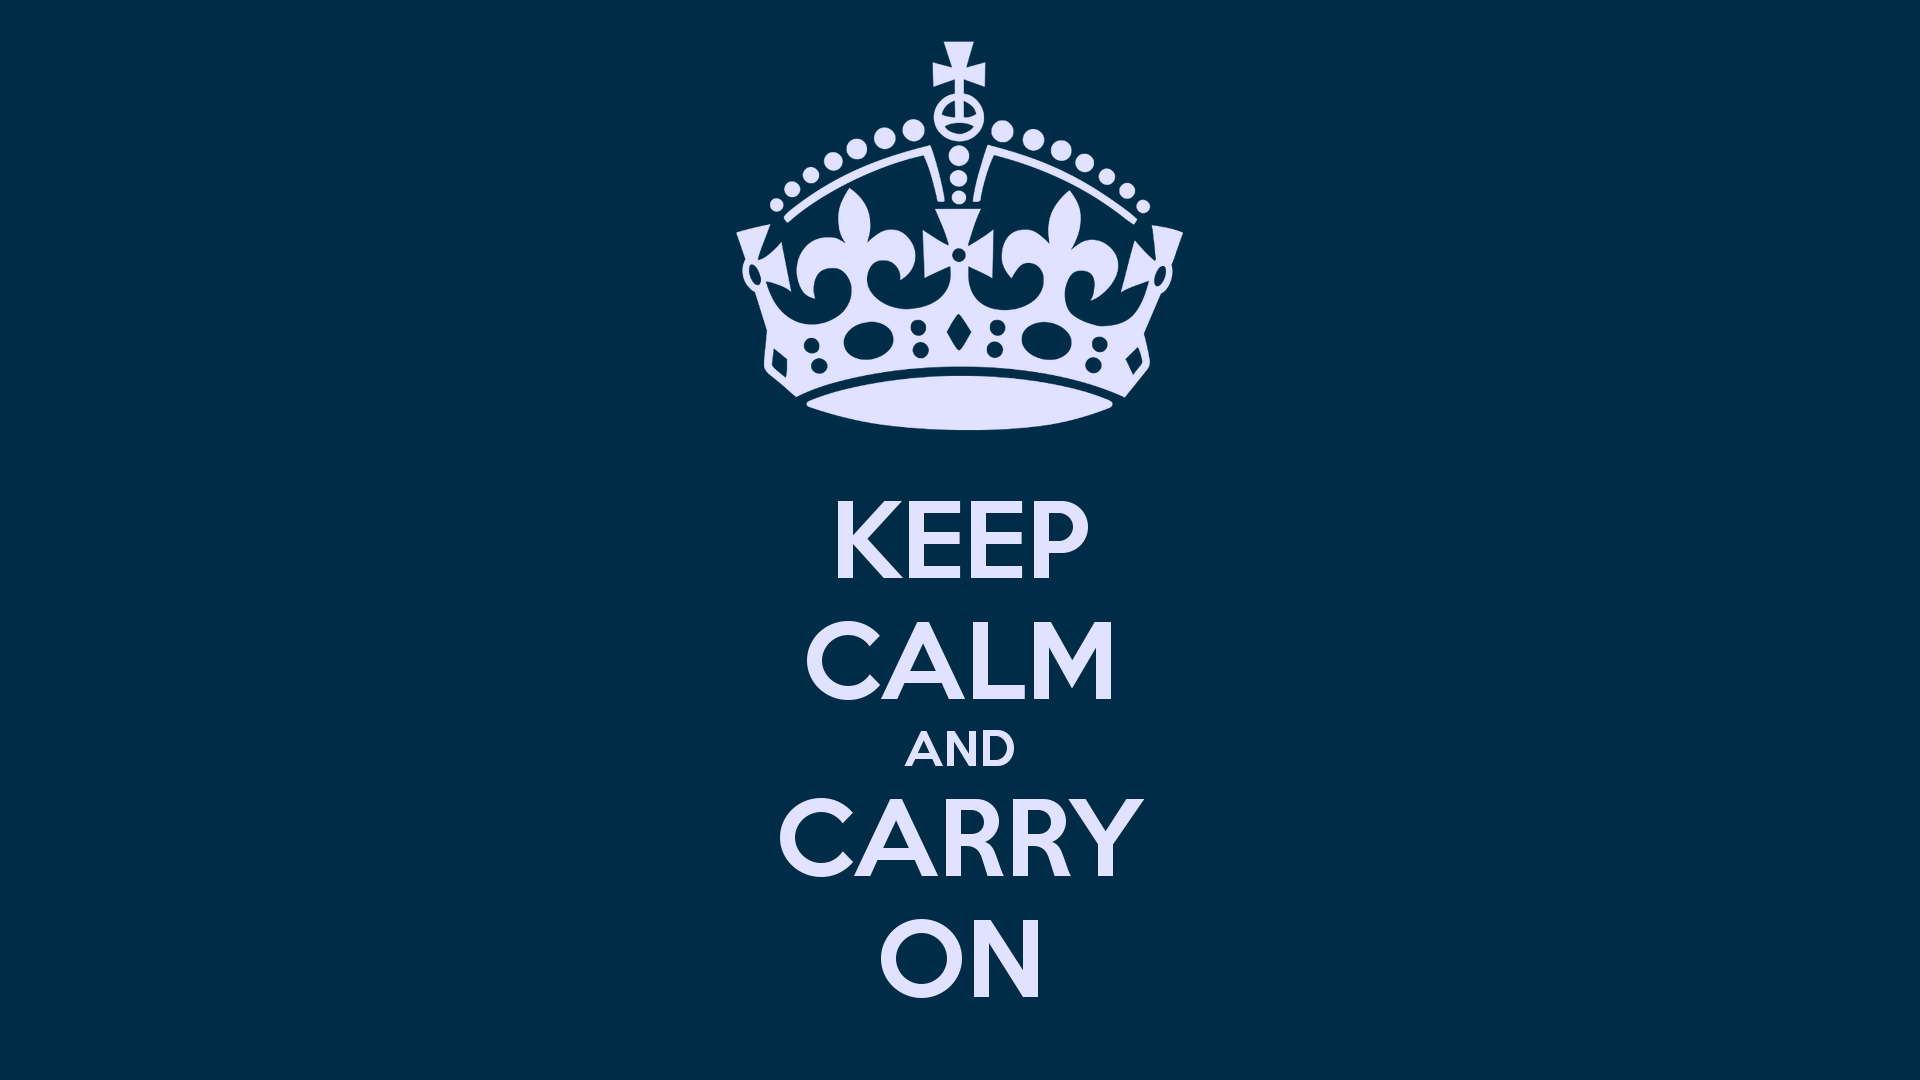 Keep Calm and Carry On 7363 1920x1080 px